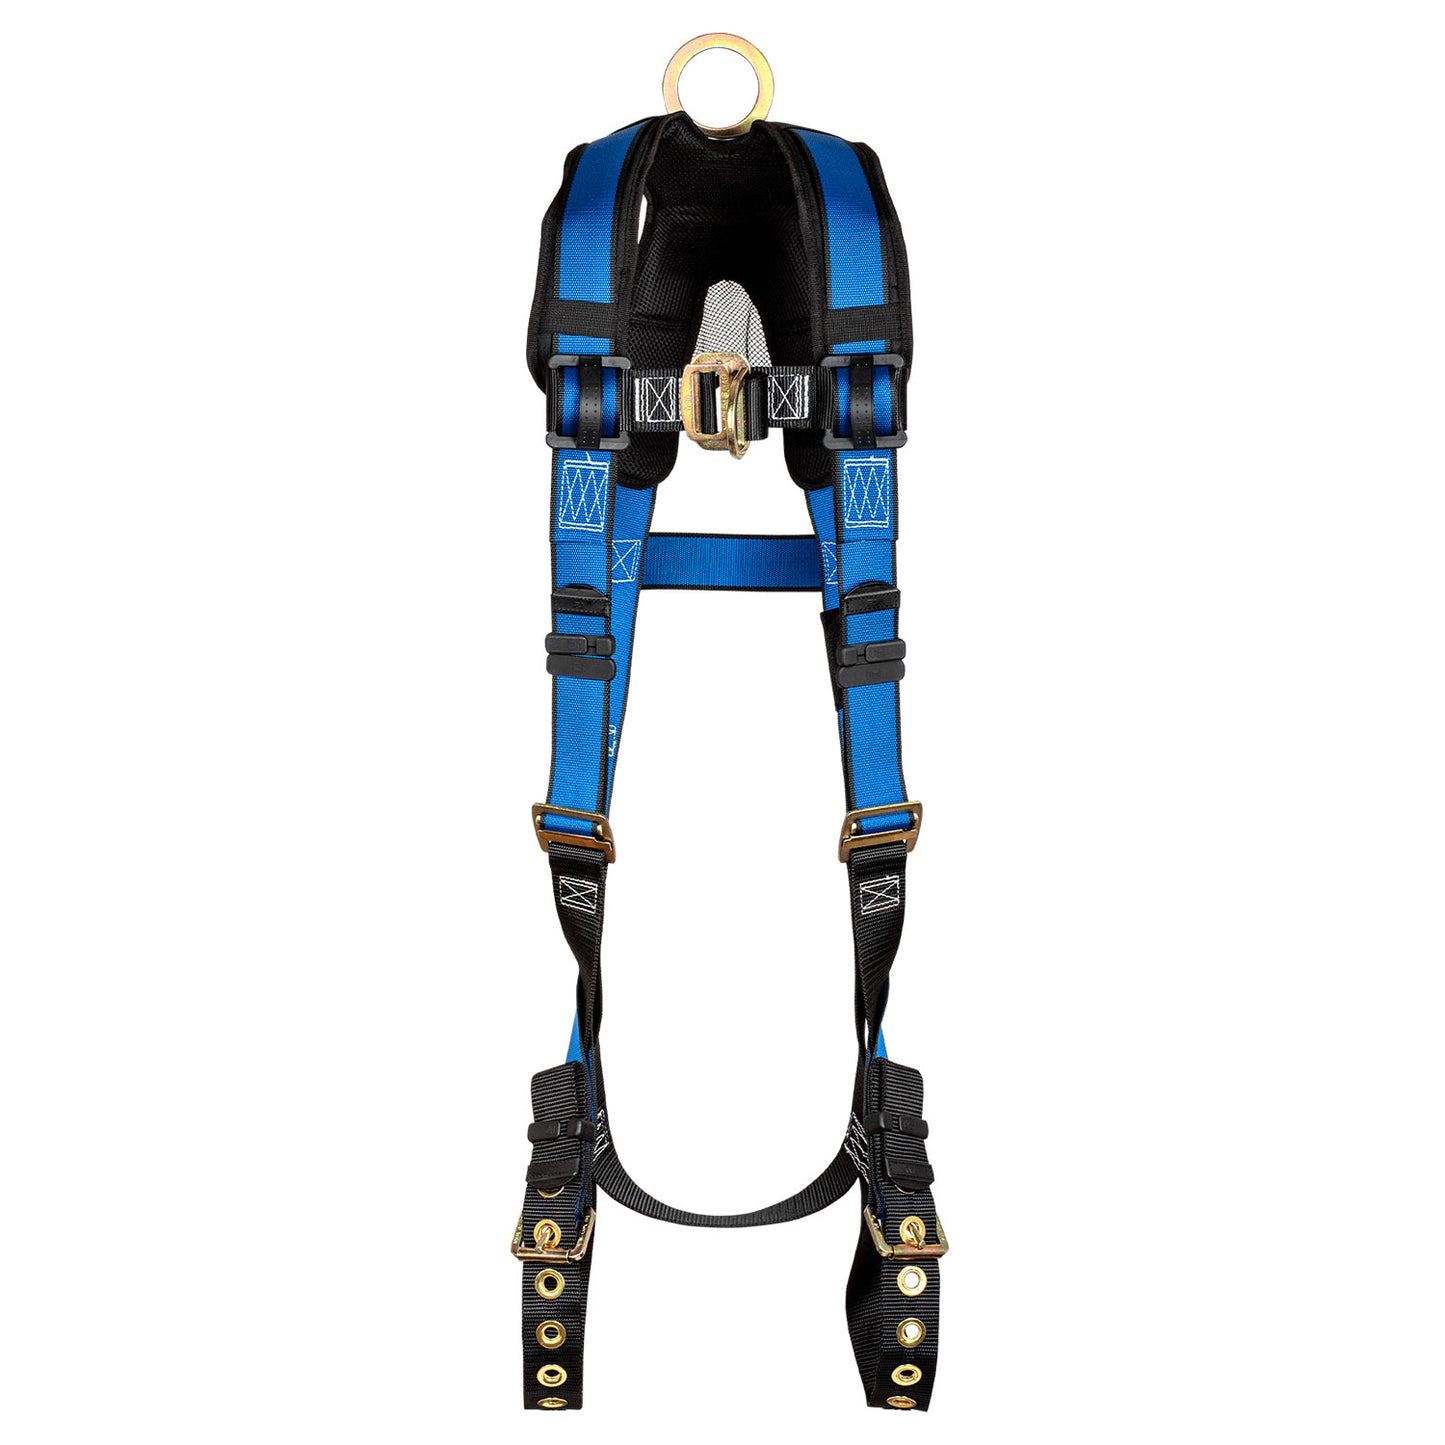 FallTech Contractor+ Full-Body Climbing Harness | Non-Belted | S | 7016BFDS